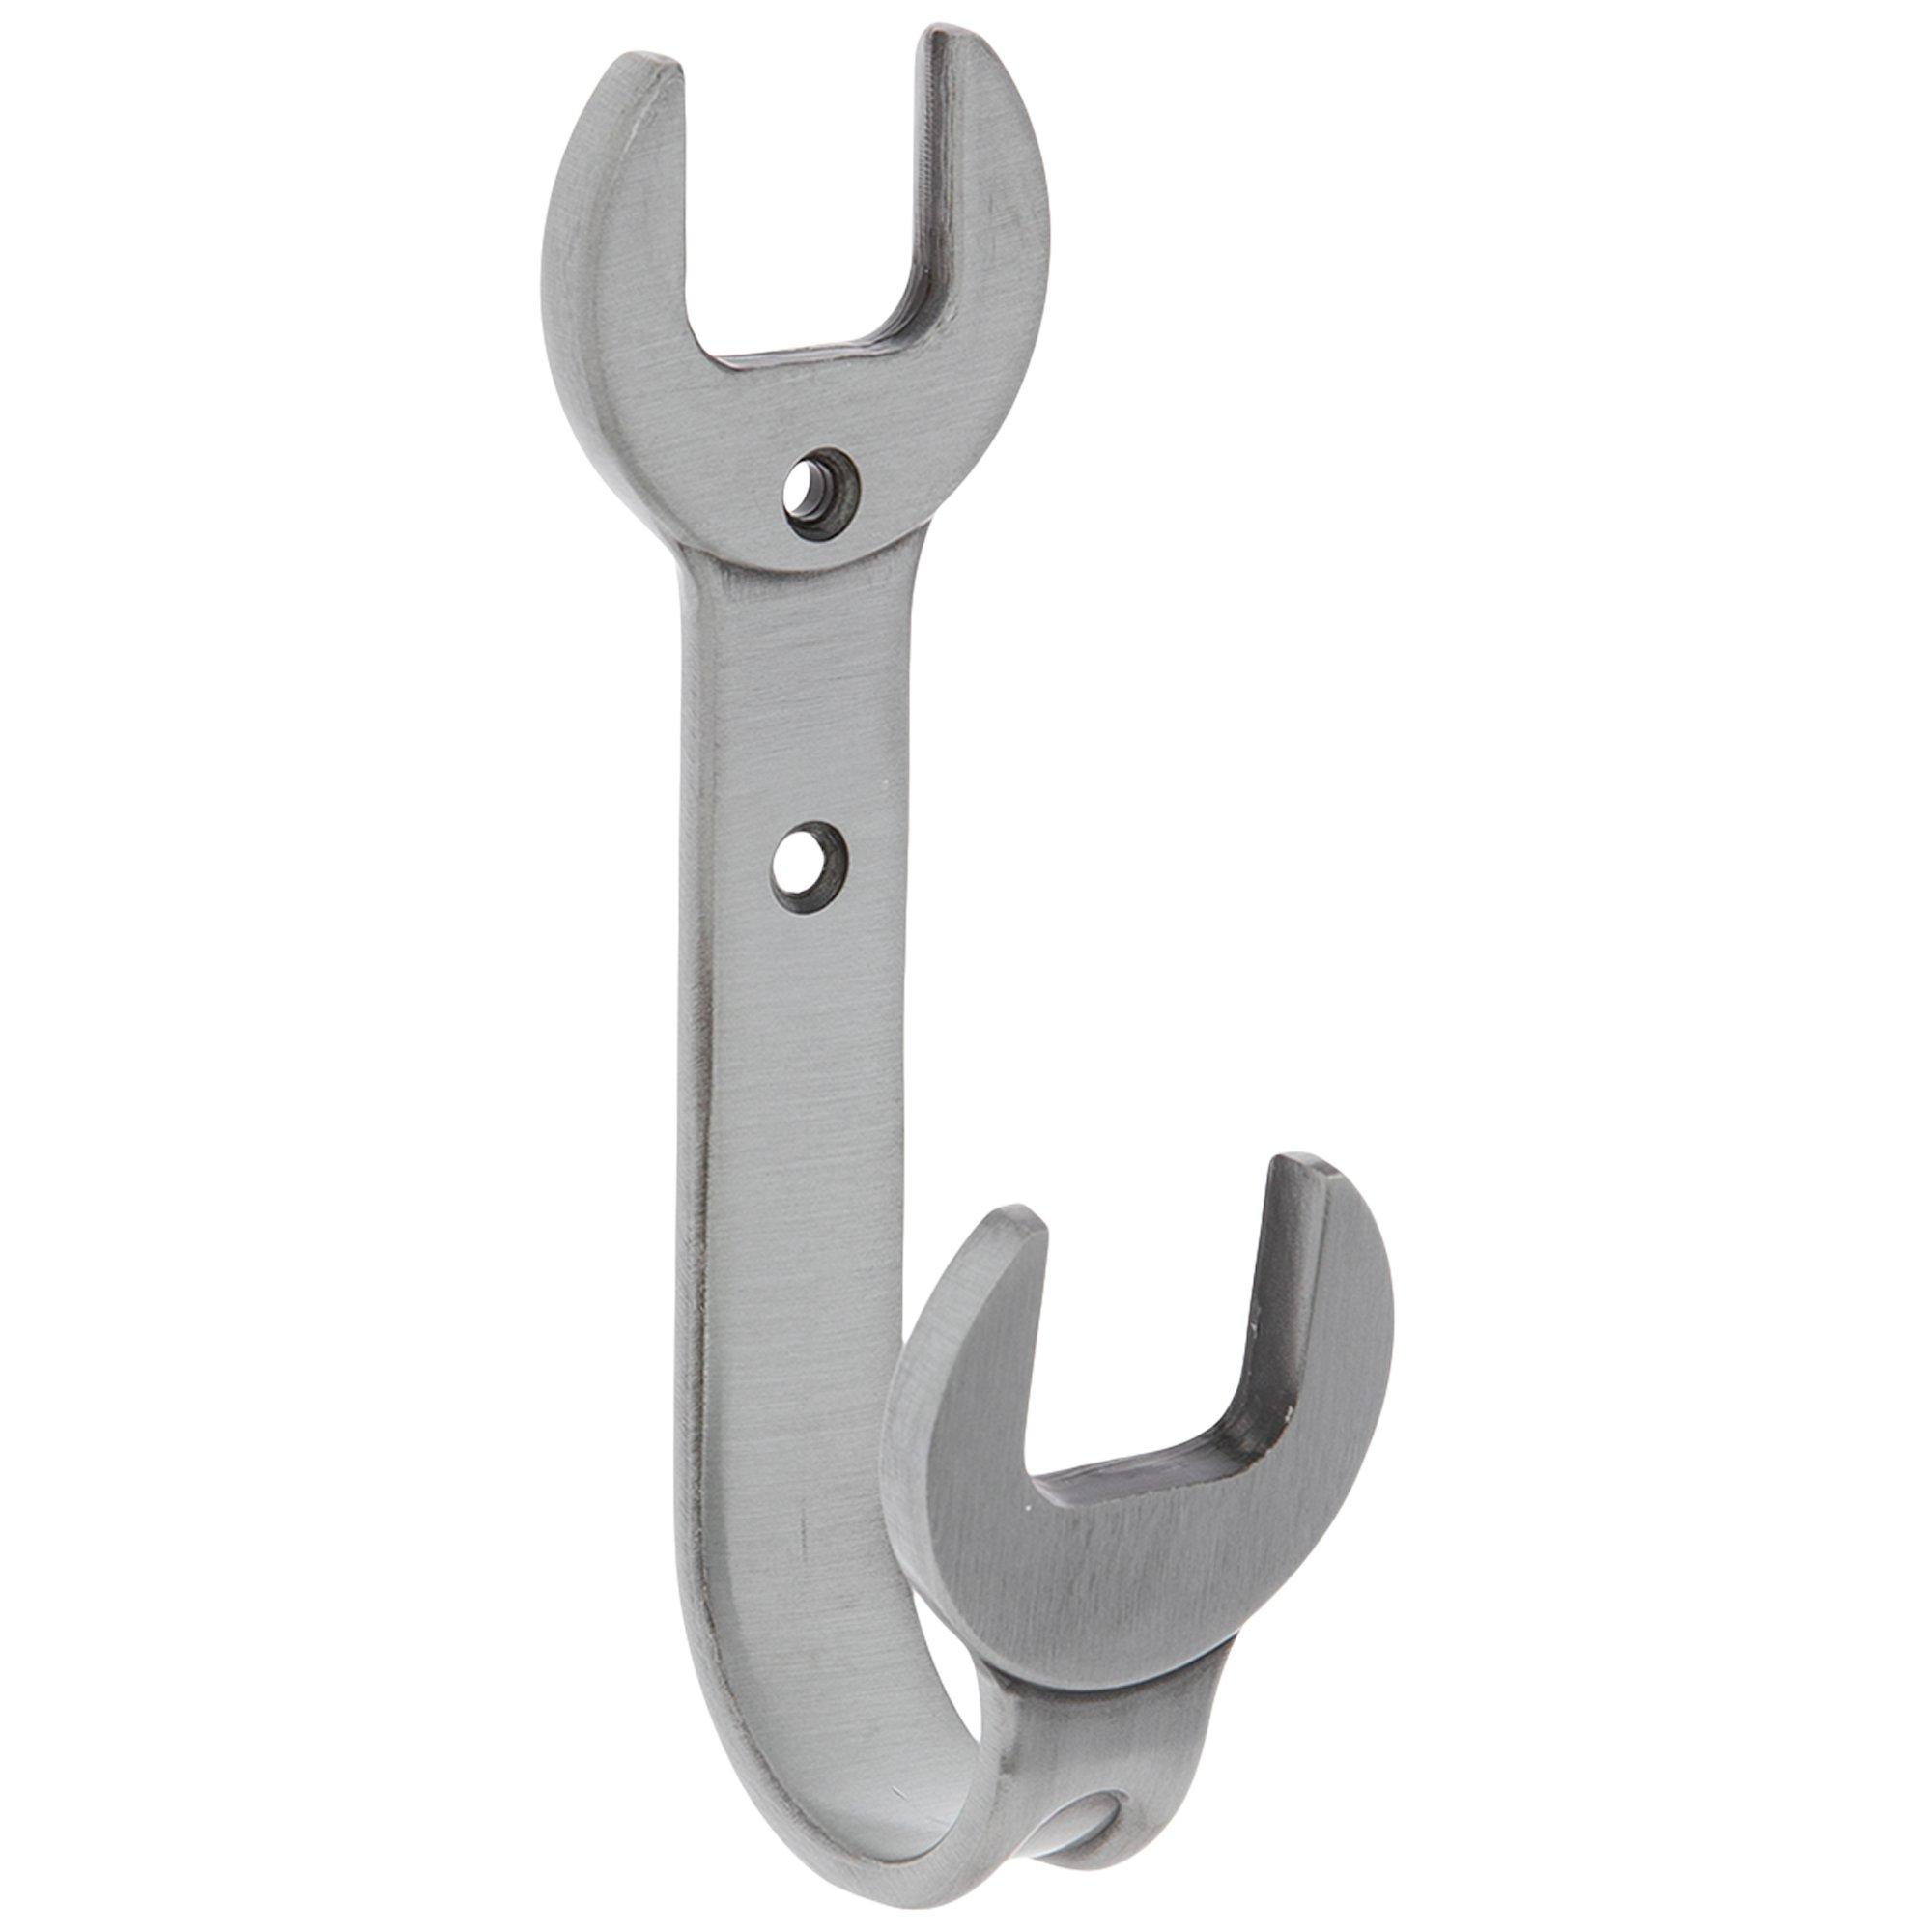  Wrench Hook